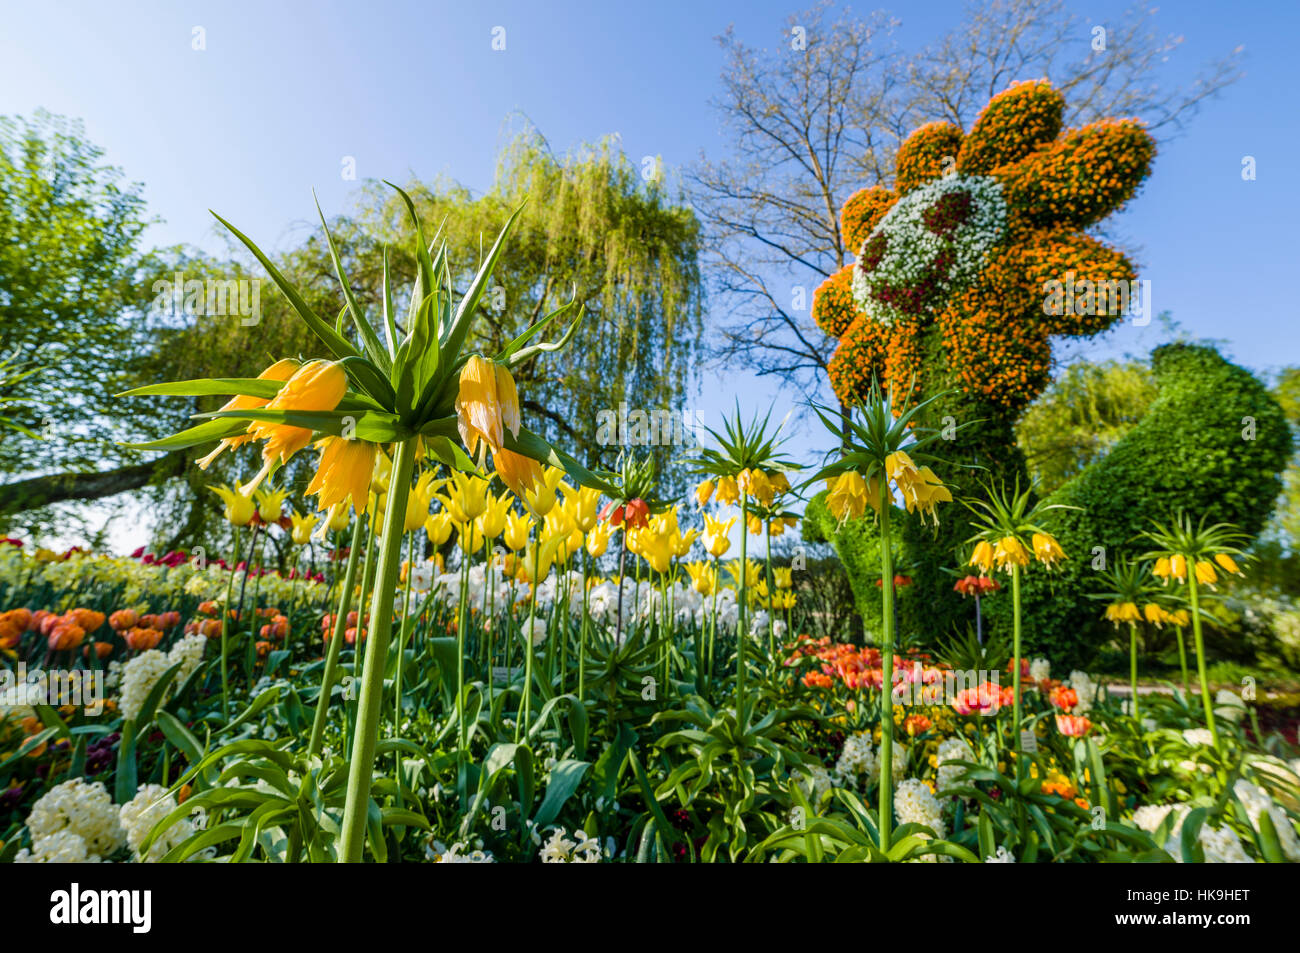 Sculpture of a sunflower made by blooming flowers at Island Mainau, the 'Island of flowers' at Lake Constance Stock Photo